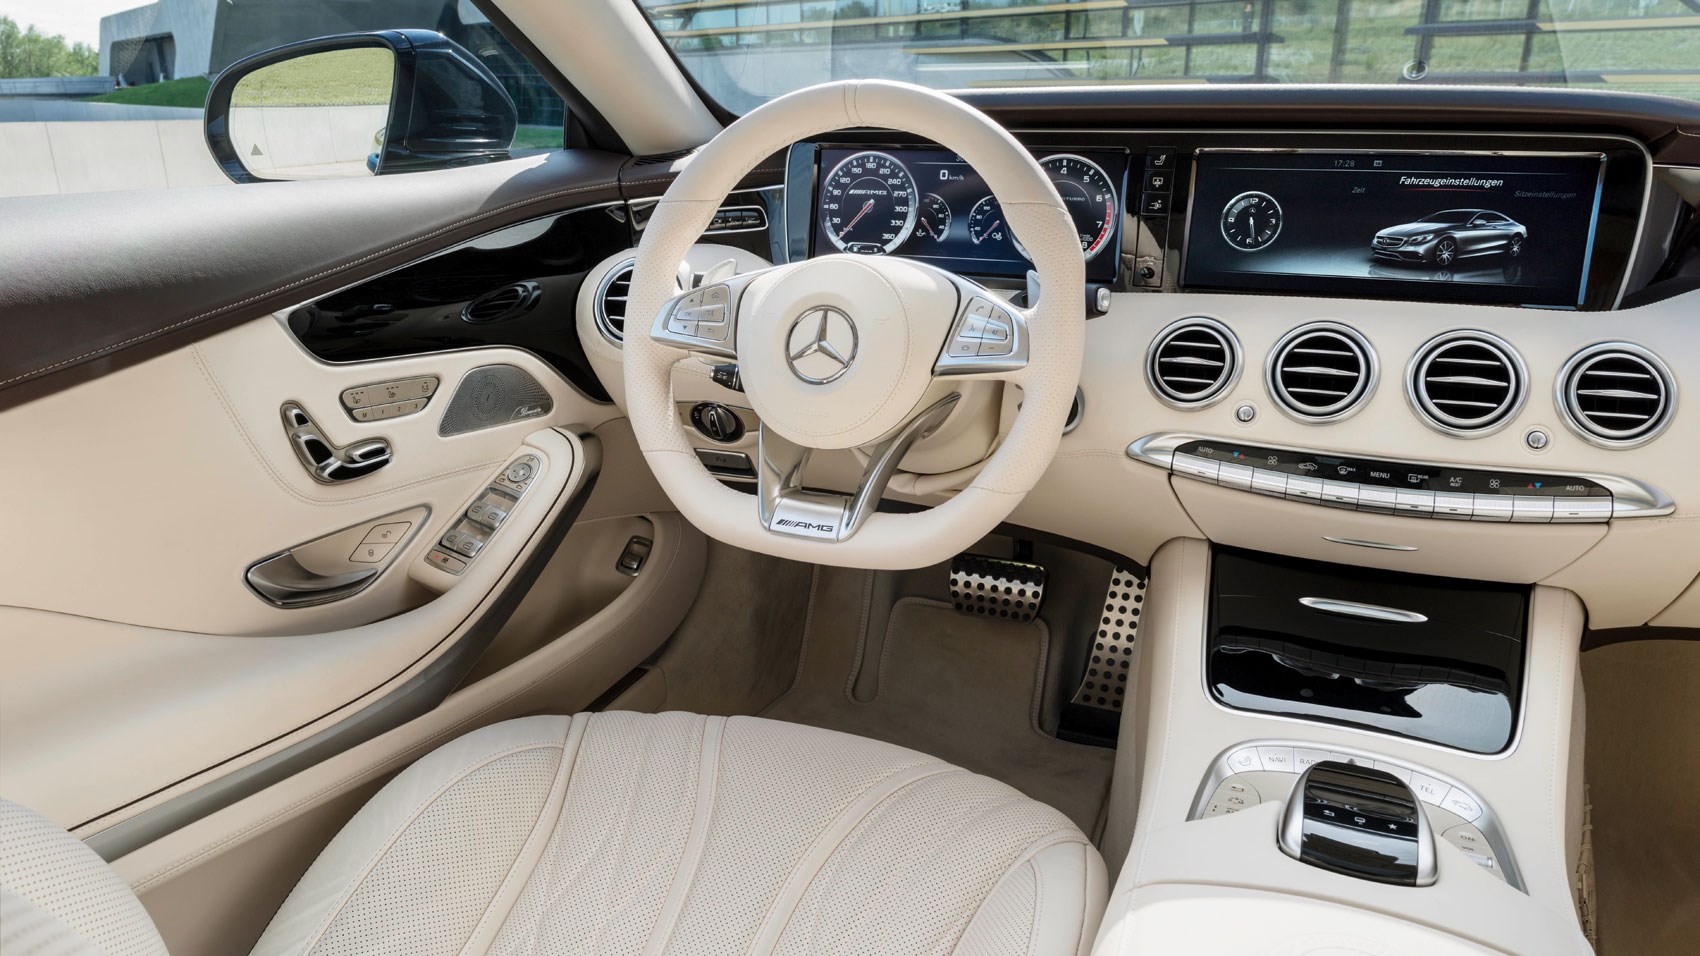 Mercedes-AMG S65 Coupe interior